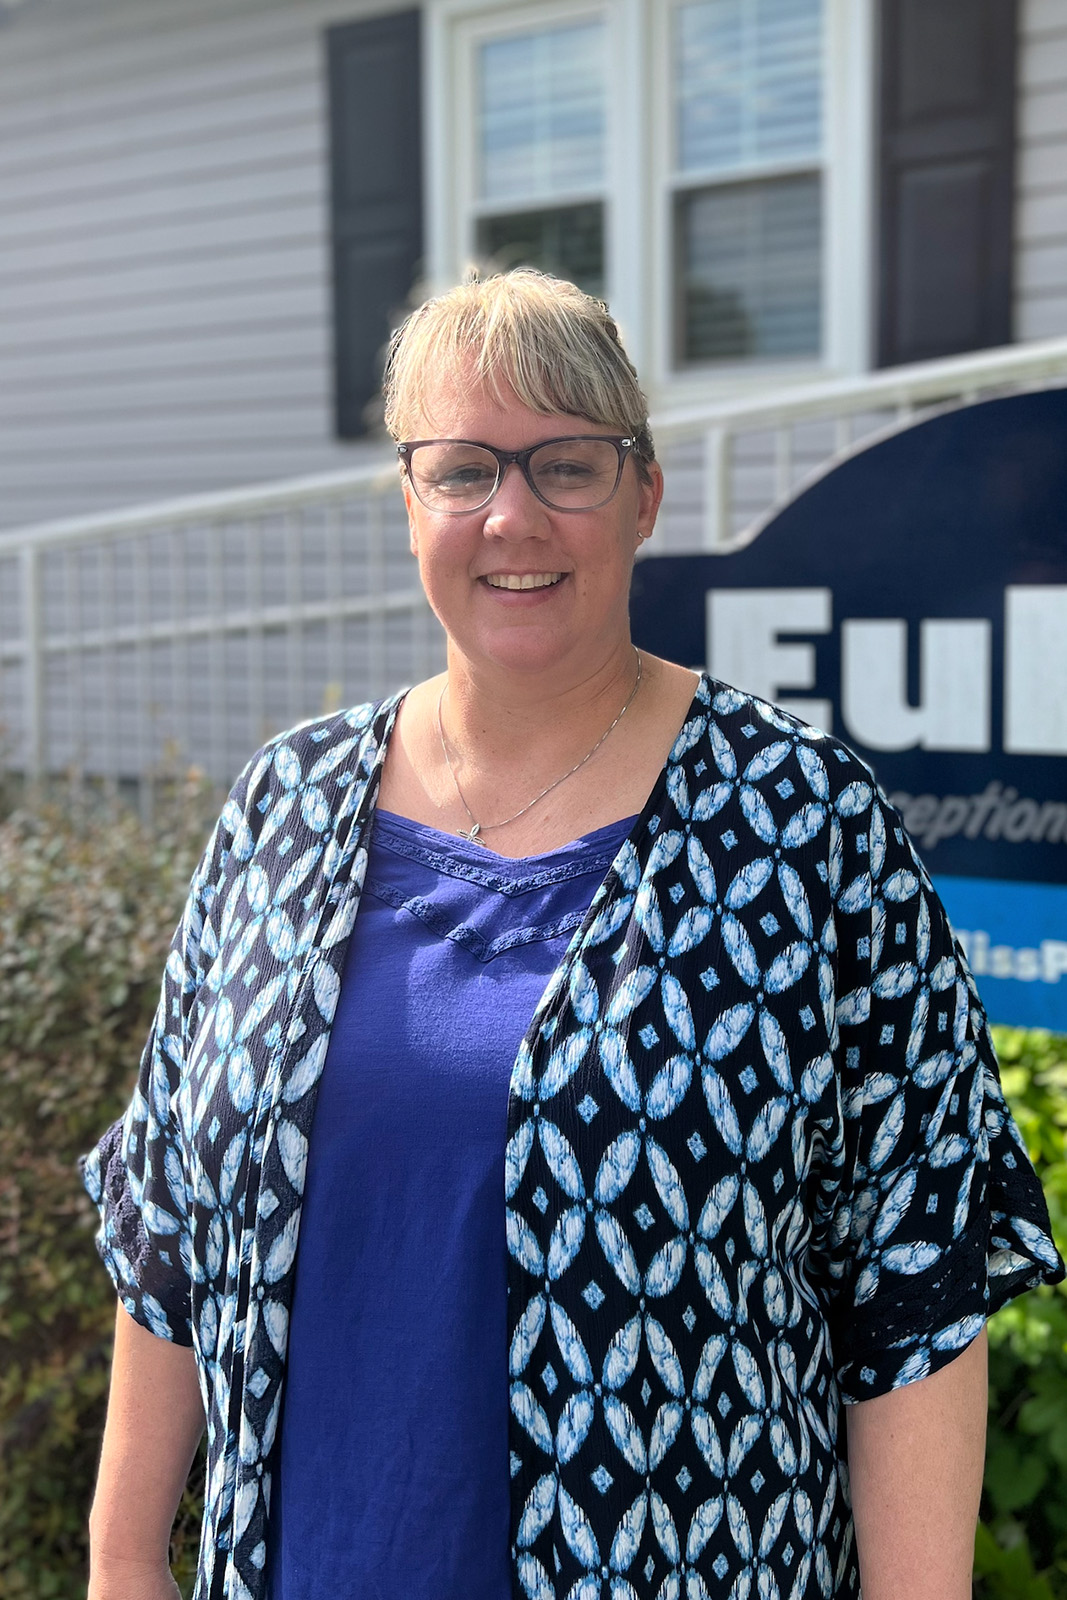 Amy Johnson, Euliss Propane Customer Service Representative, posing for headshot in front of Euliss sign.